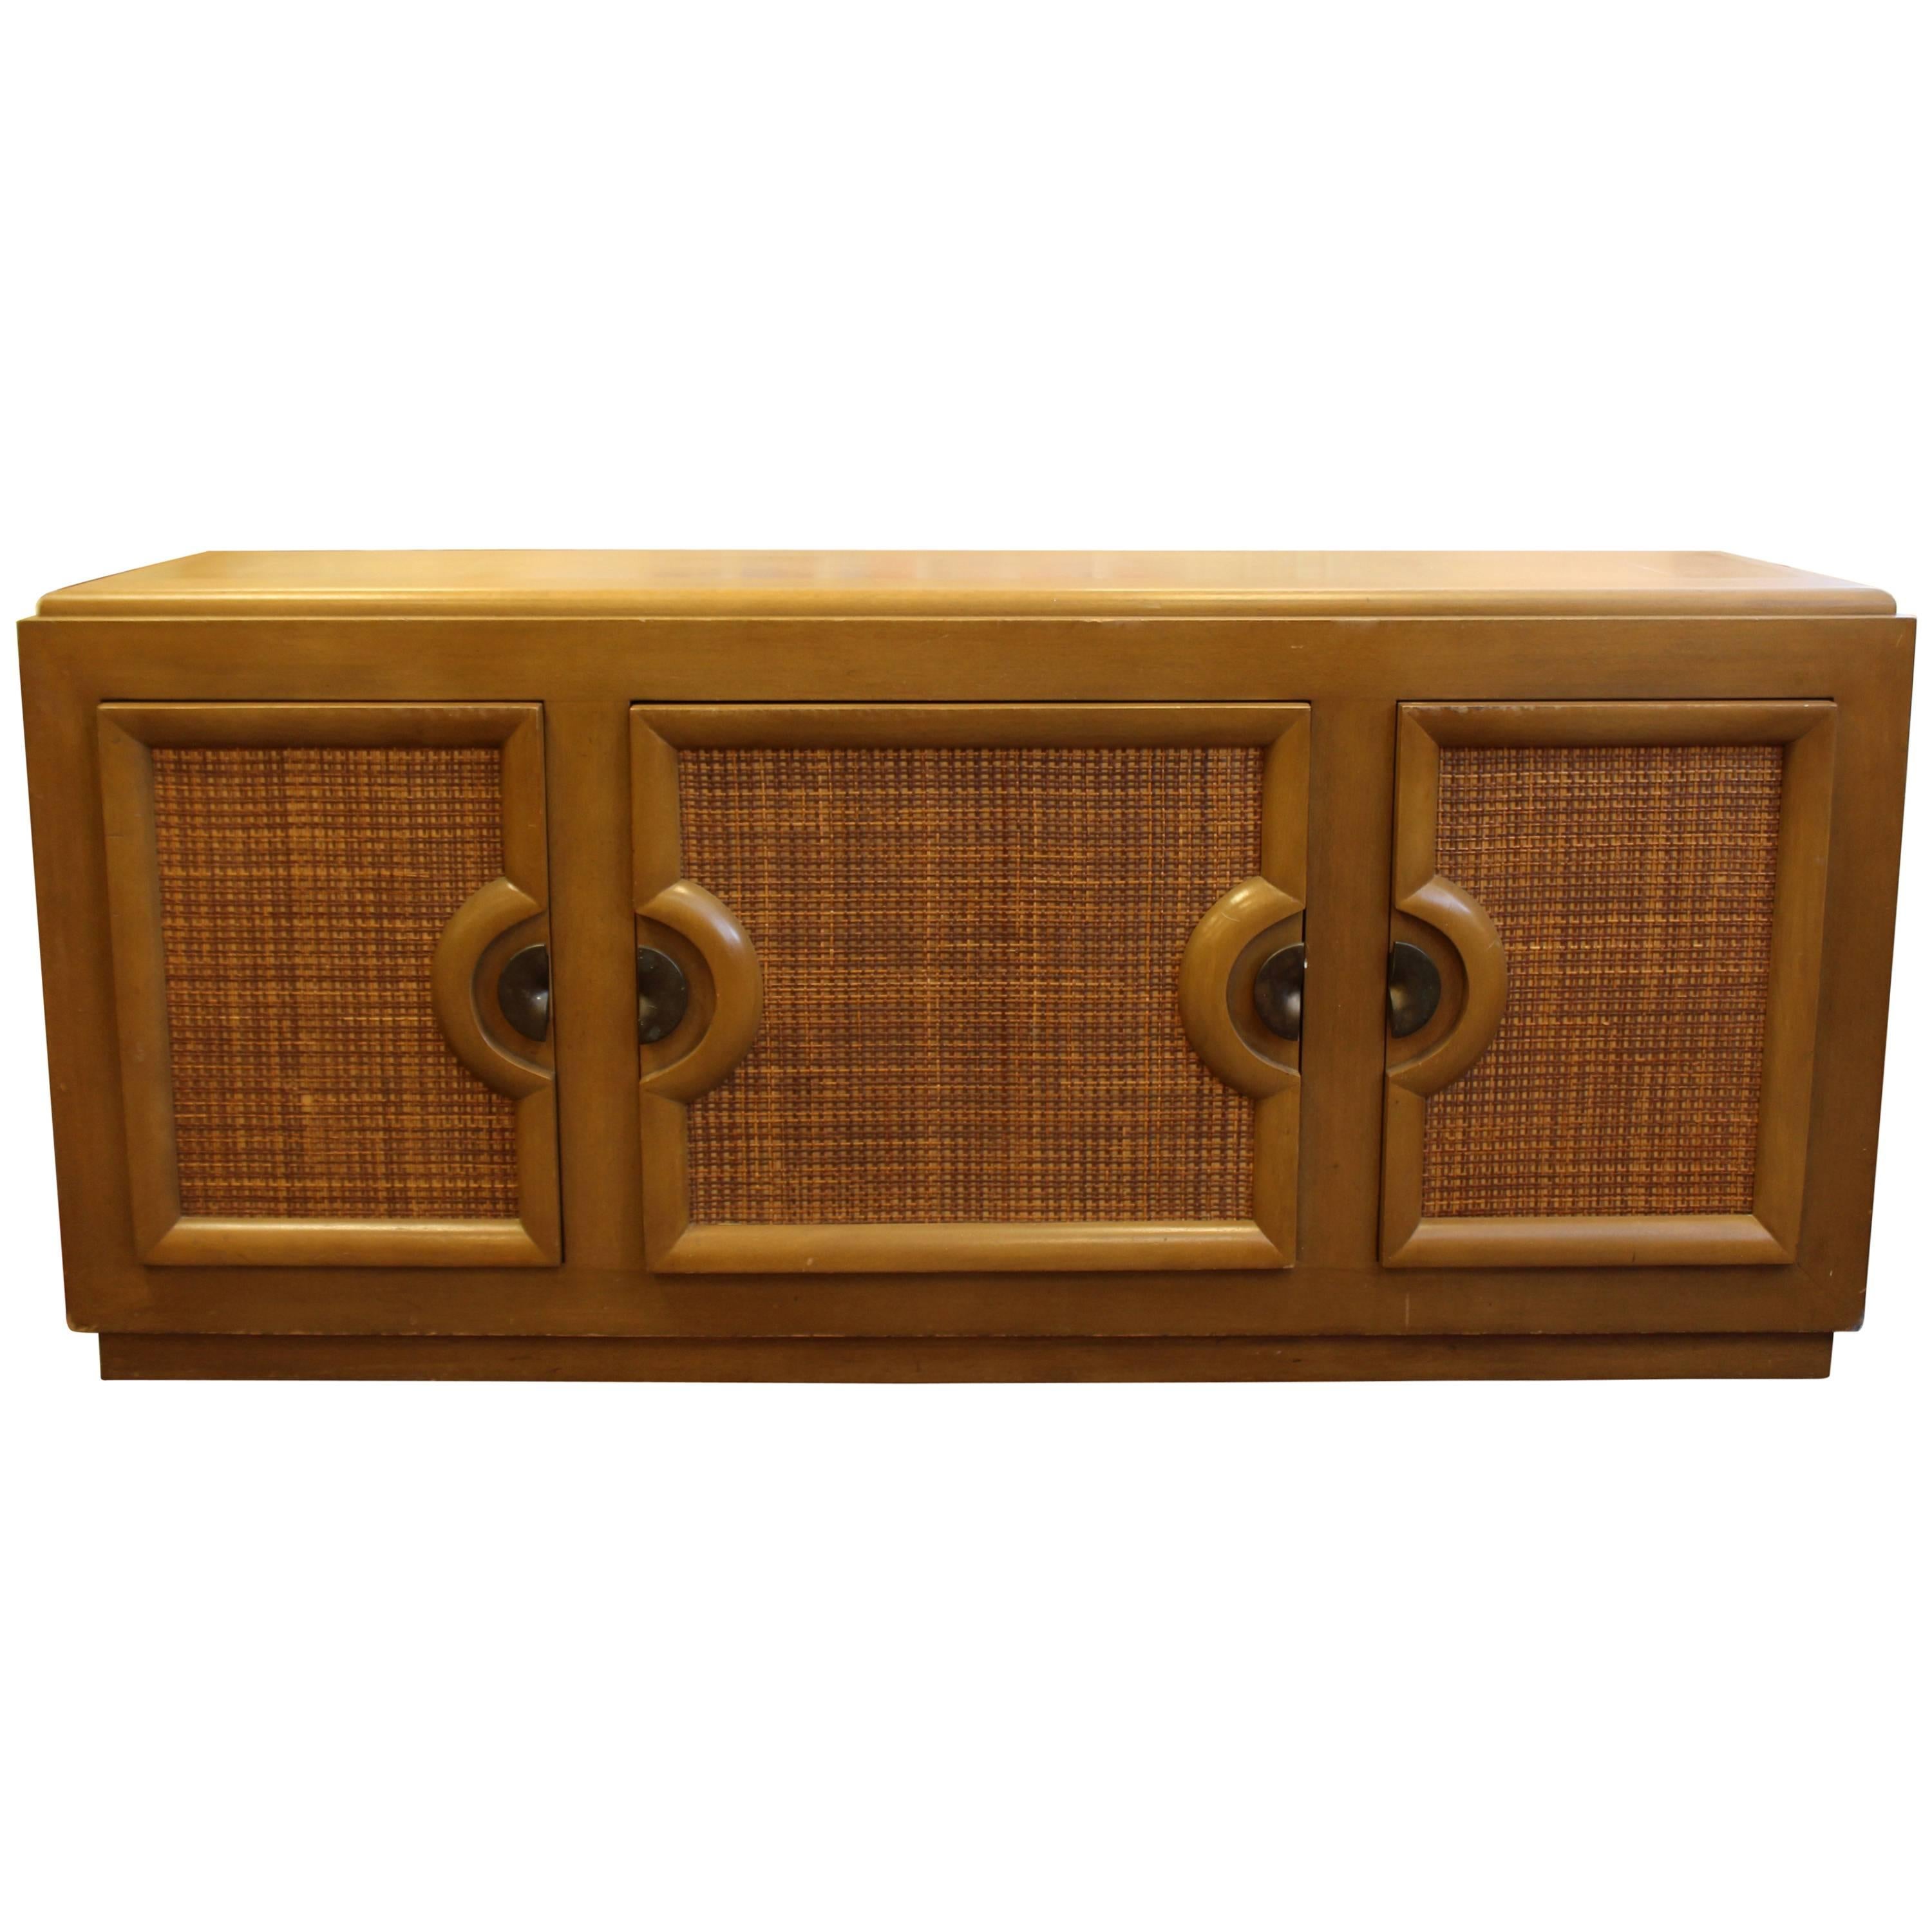 Mid-Century Modern Paul Laszlo Credenza Sideboard Buffet Cane and Wood, 1950s